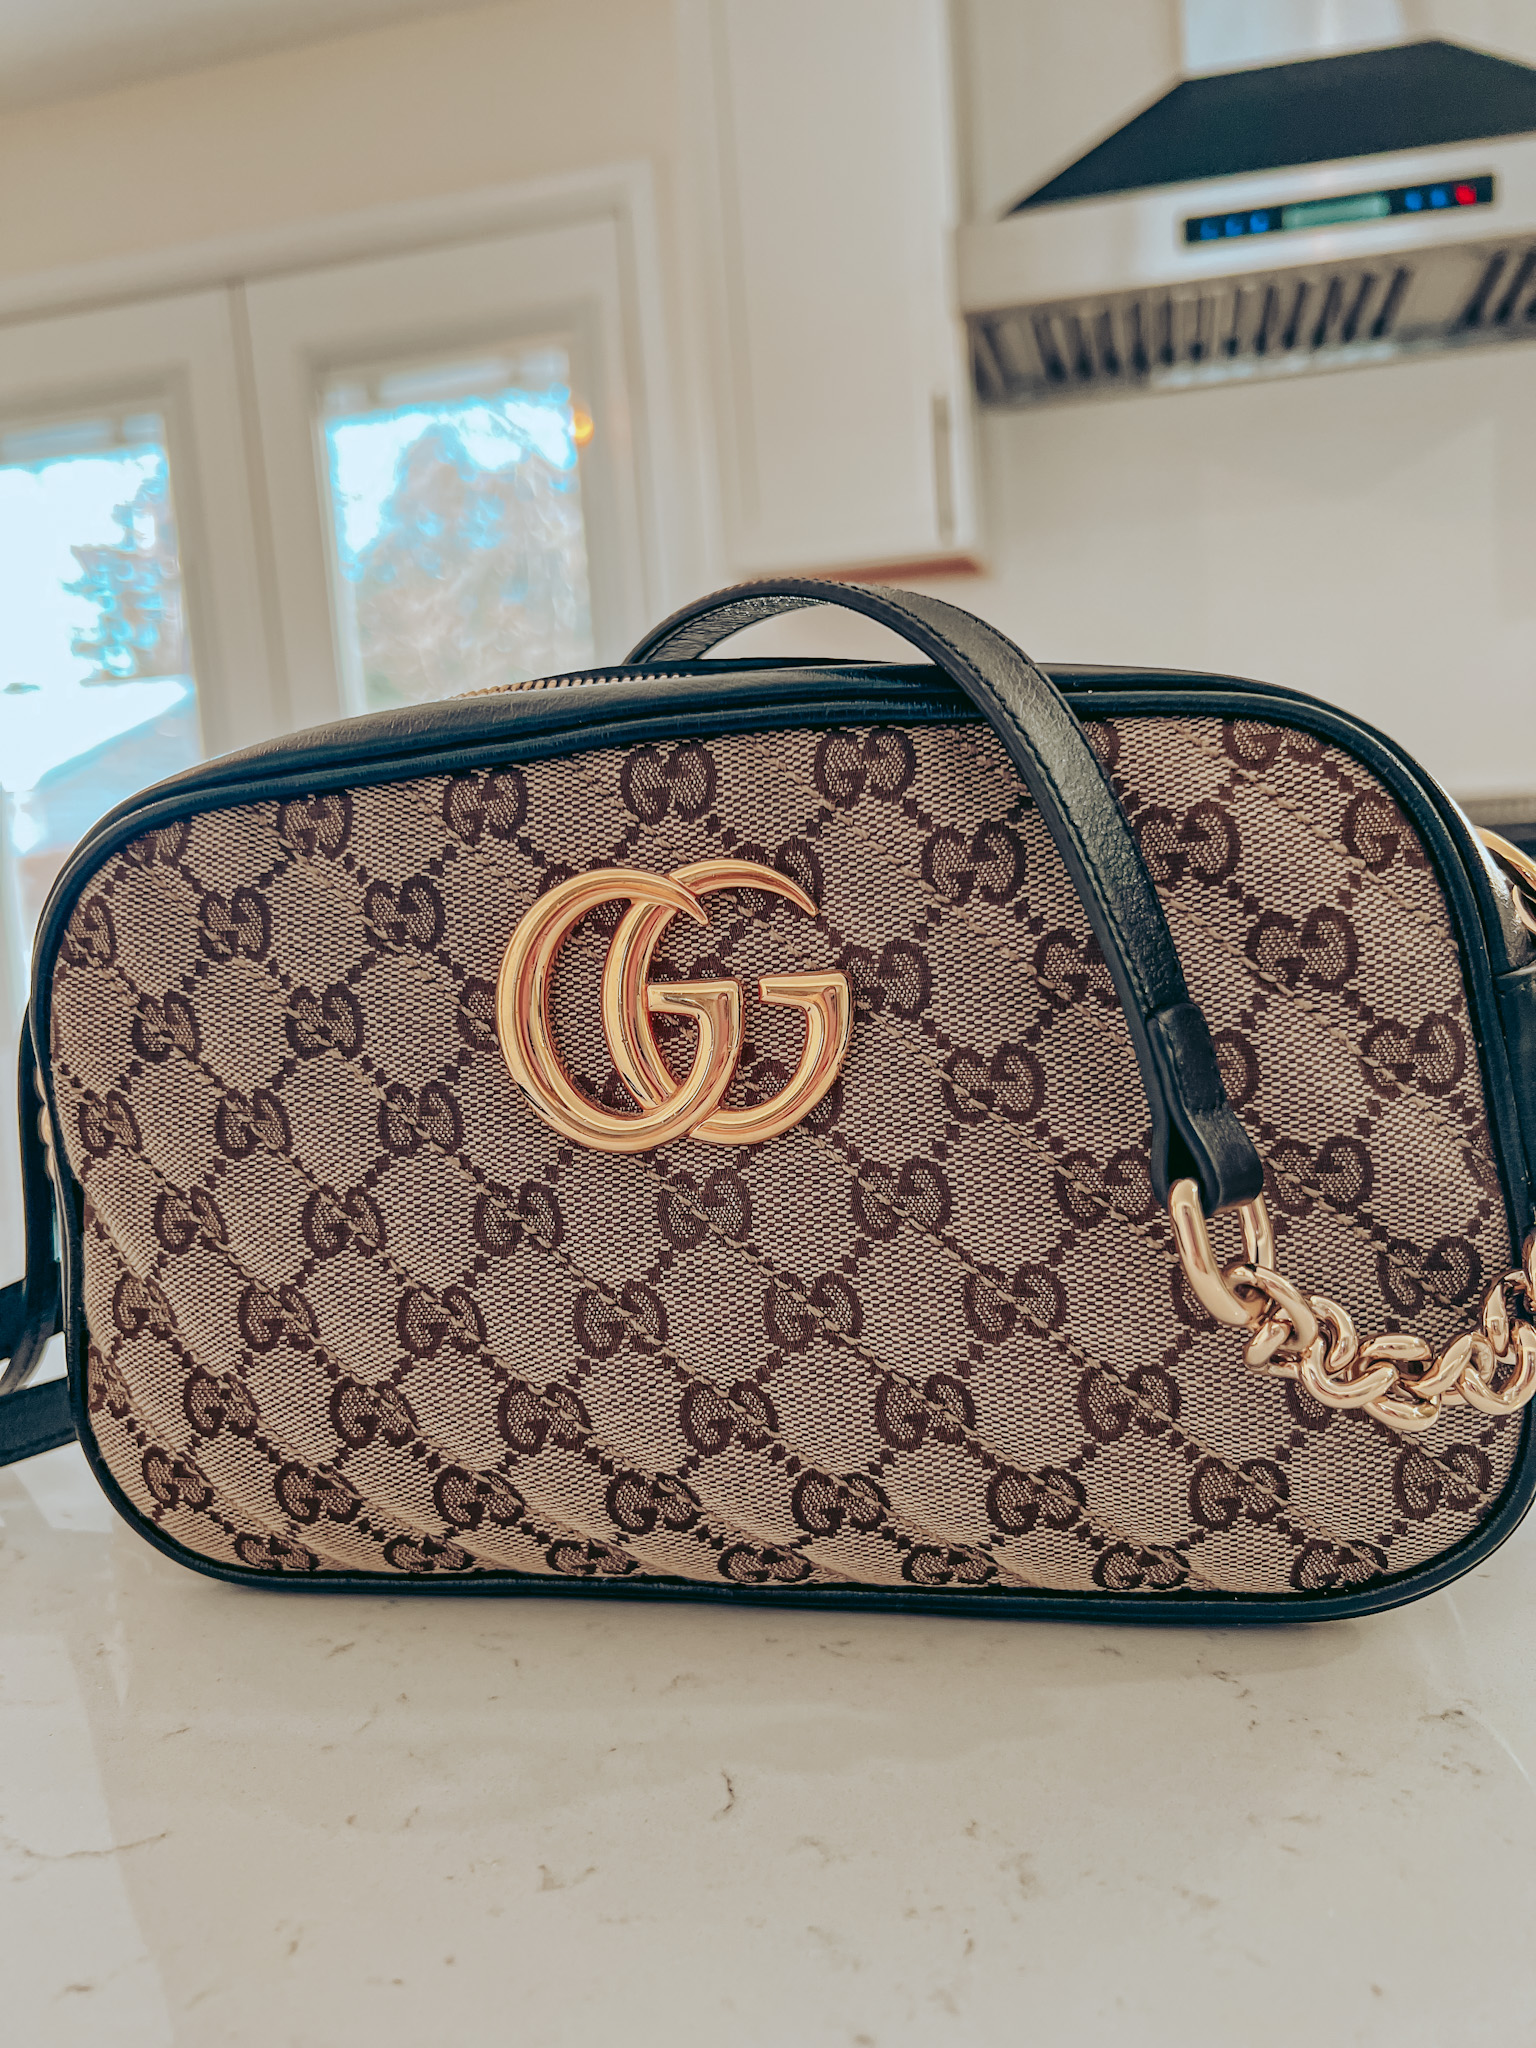 Review of the Gucci Marmont Small Shoulder Bag